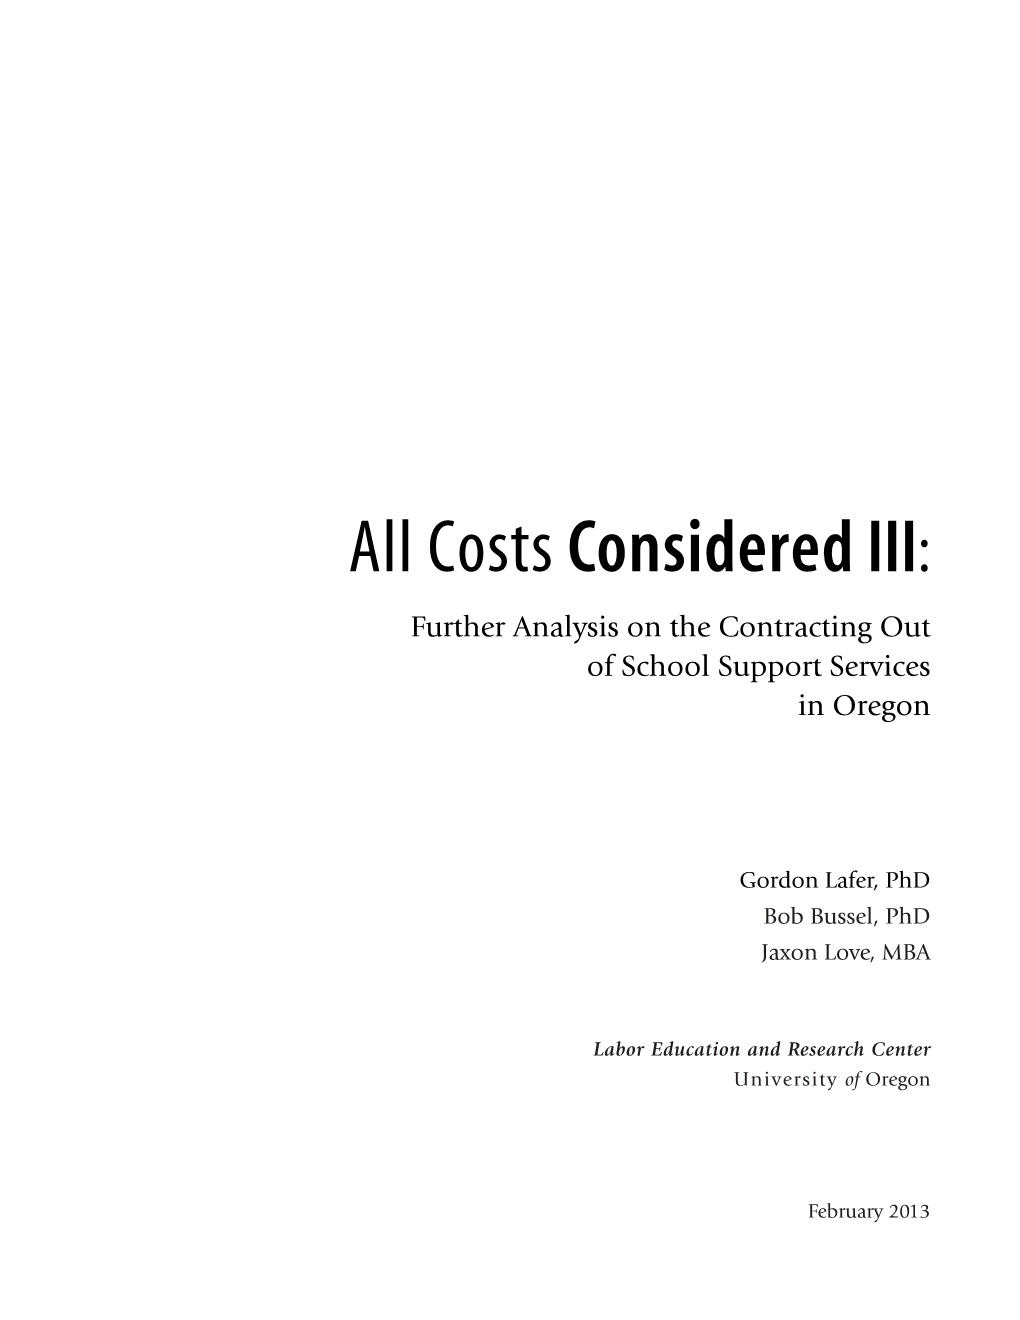 ALL COSTS CONSIDERED III — LERC Report on Contracting